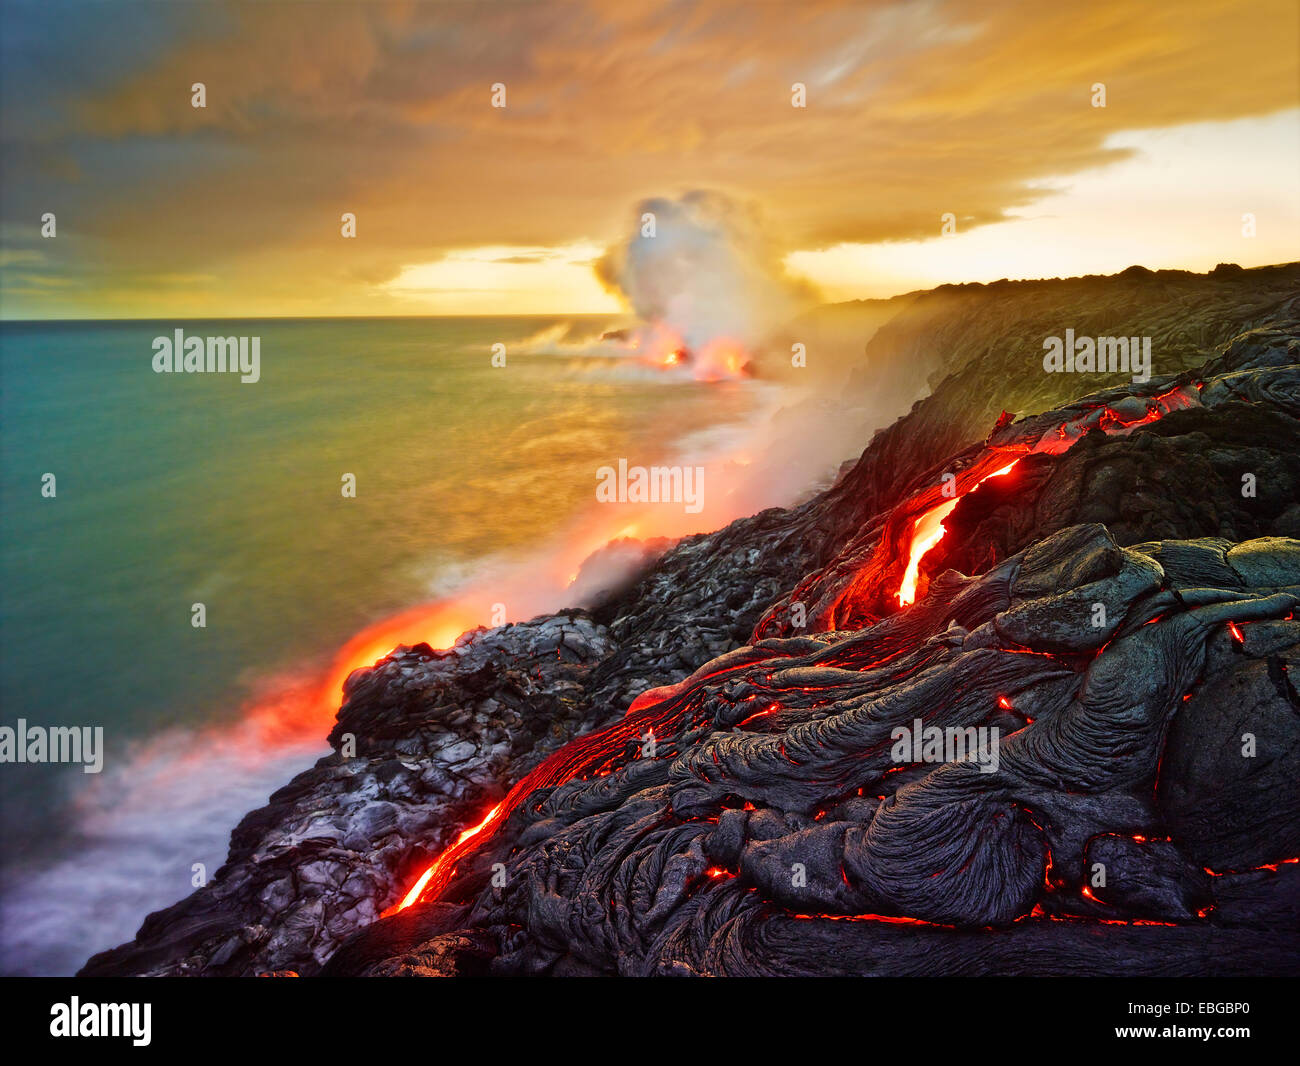 Puʻu ʻŌʻō or Puu Oo volcano, volcanic eruption, lava flow, red hot lava flowing into the Pacific Ocean Stock Photo